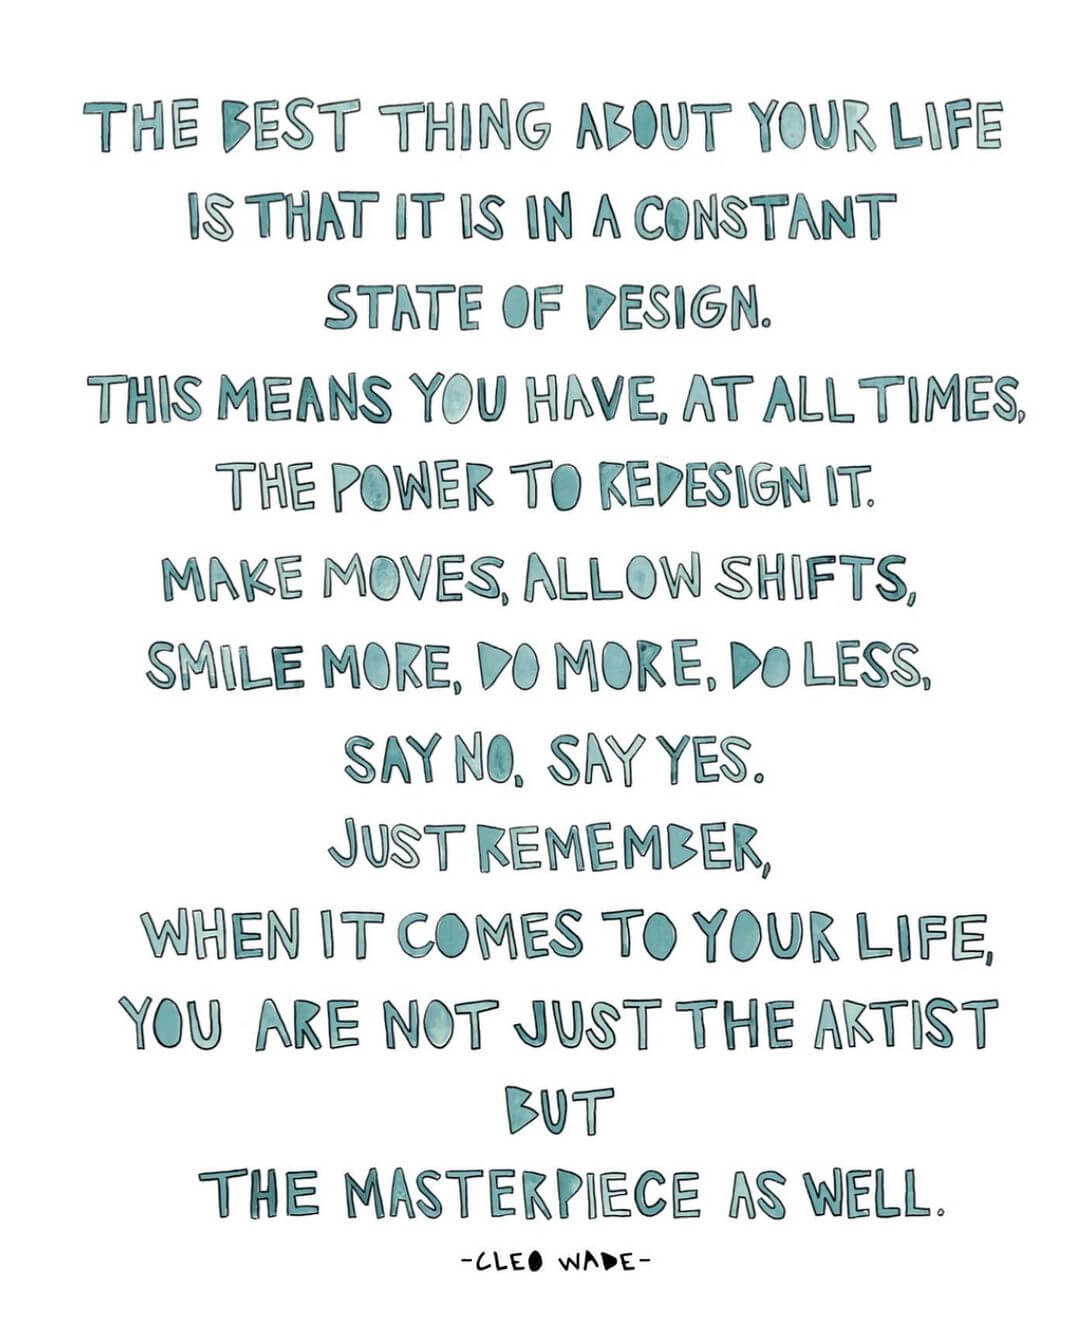 poem by cleo wade that reads: The best thing about your life is that it is in a constant state of design. This means you have, at all times, the power to redesign it. Make moves, allow shifts, smile more, do more, do less, say no, say yes. Just remember when it comes to your life, you are not just the artist but the masterpiece as well.